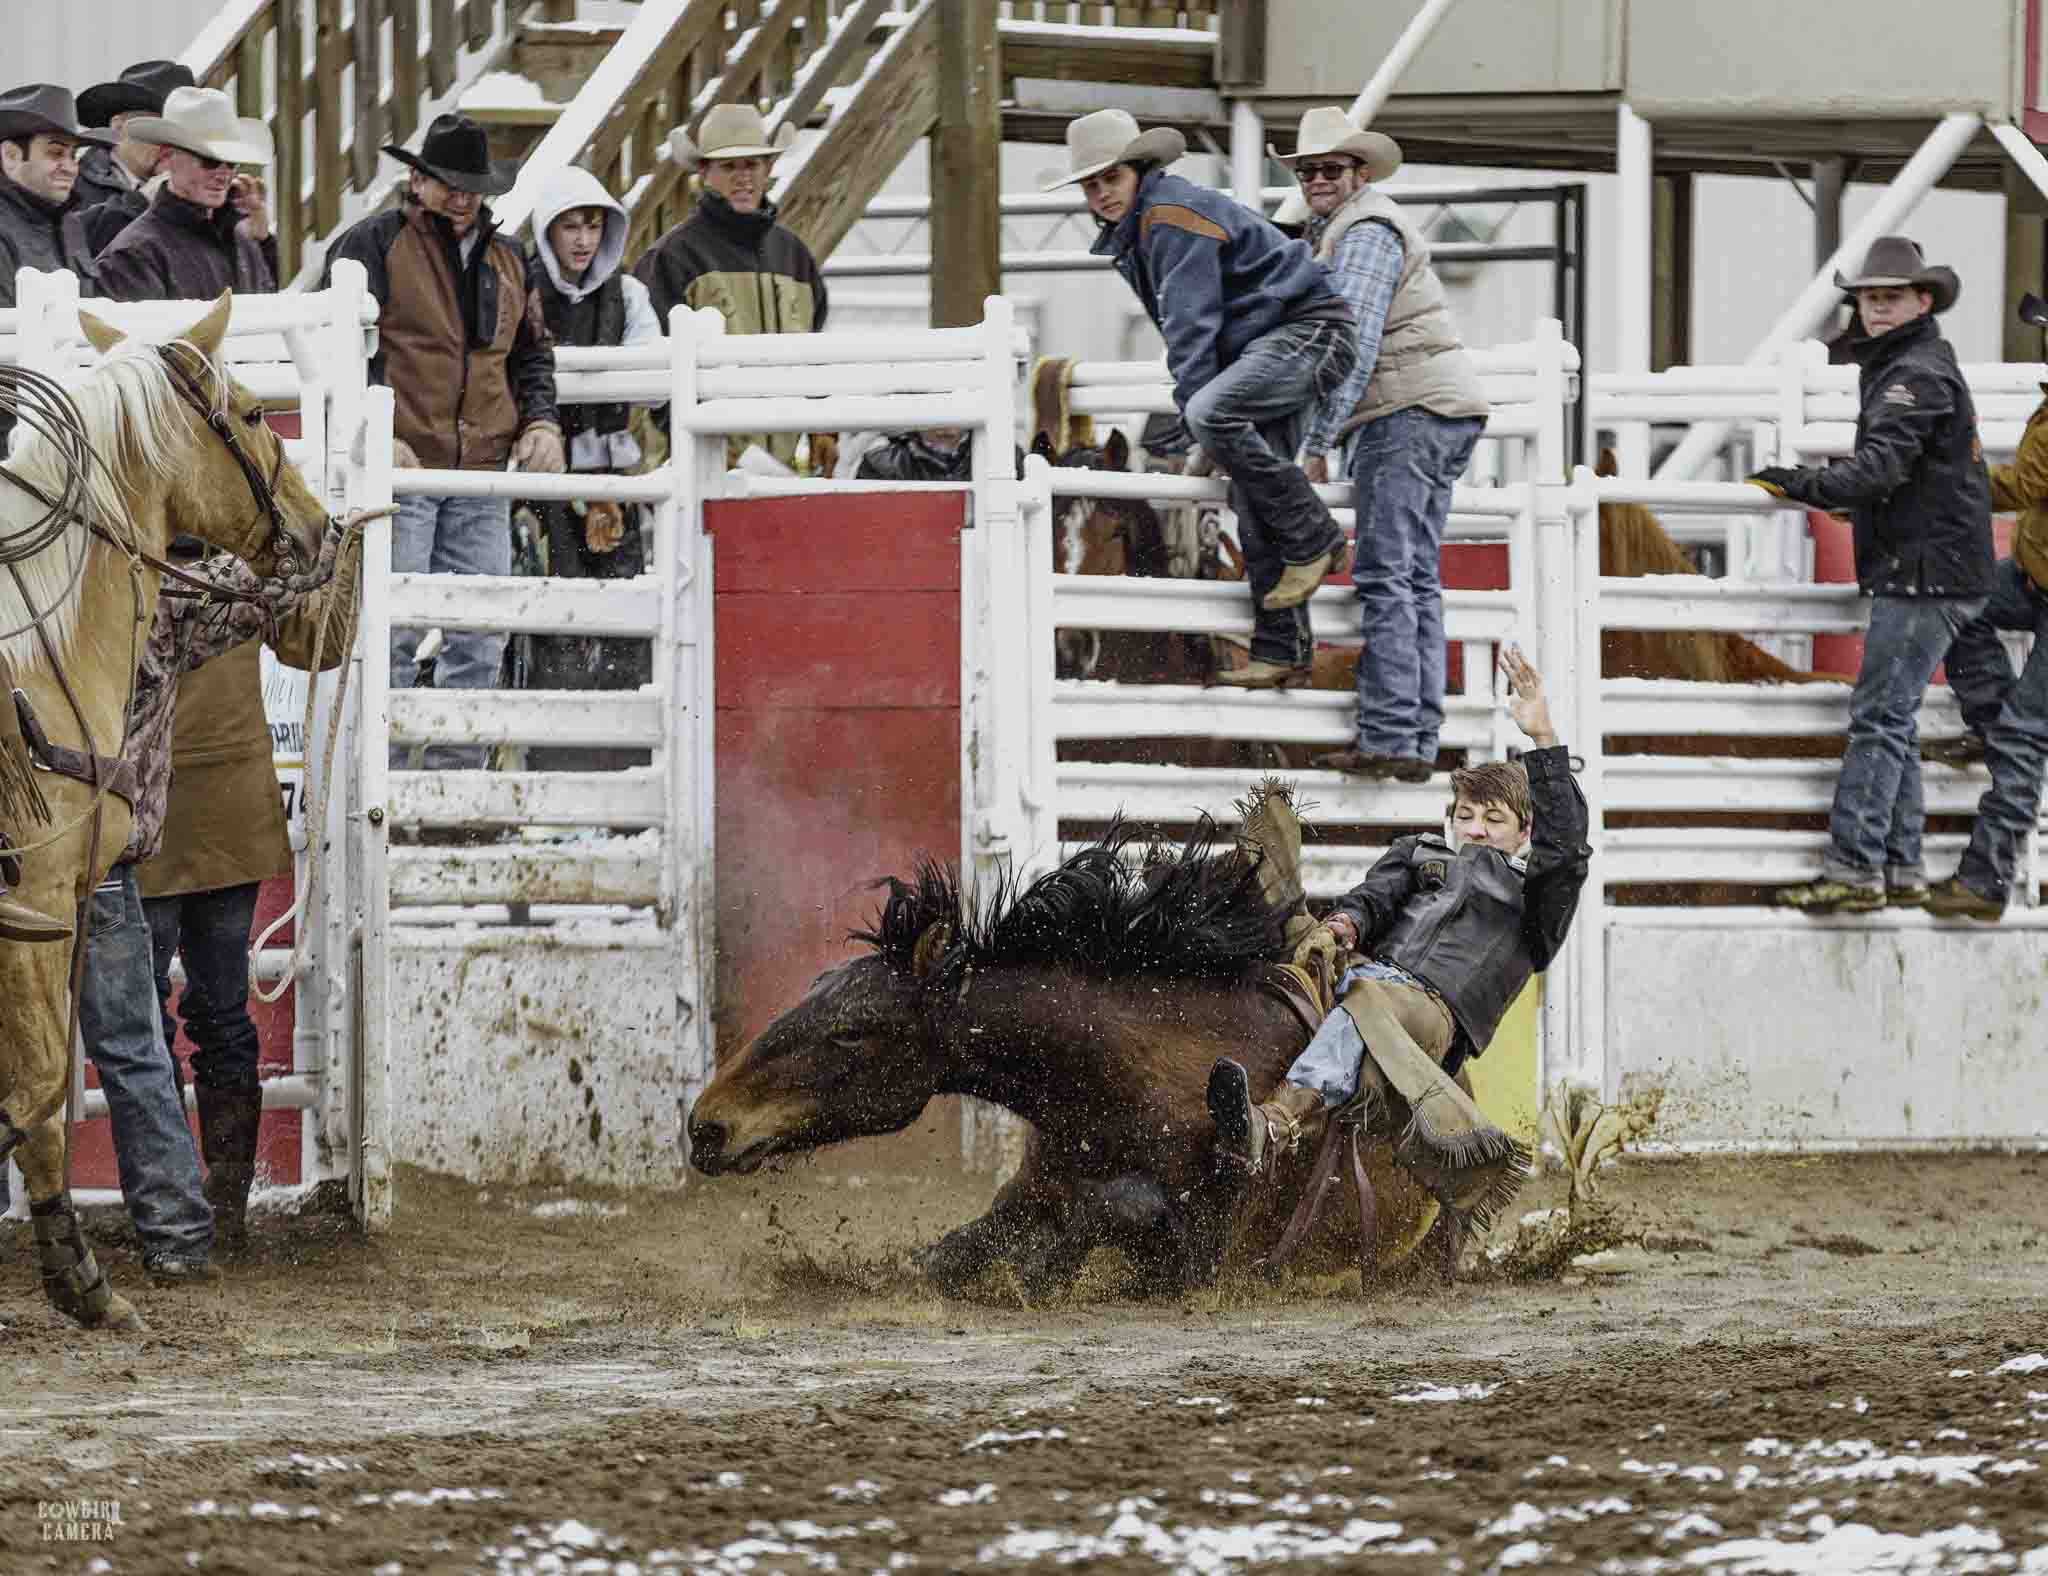 Bronc sits all the way down in the mud during a high school rodeo